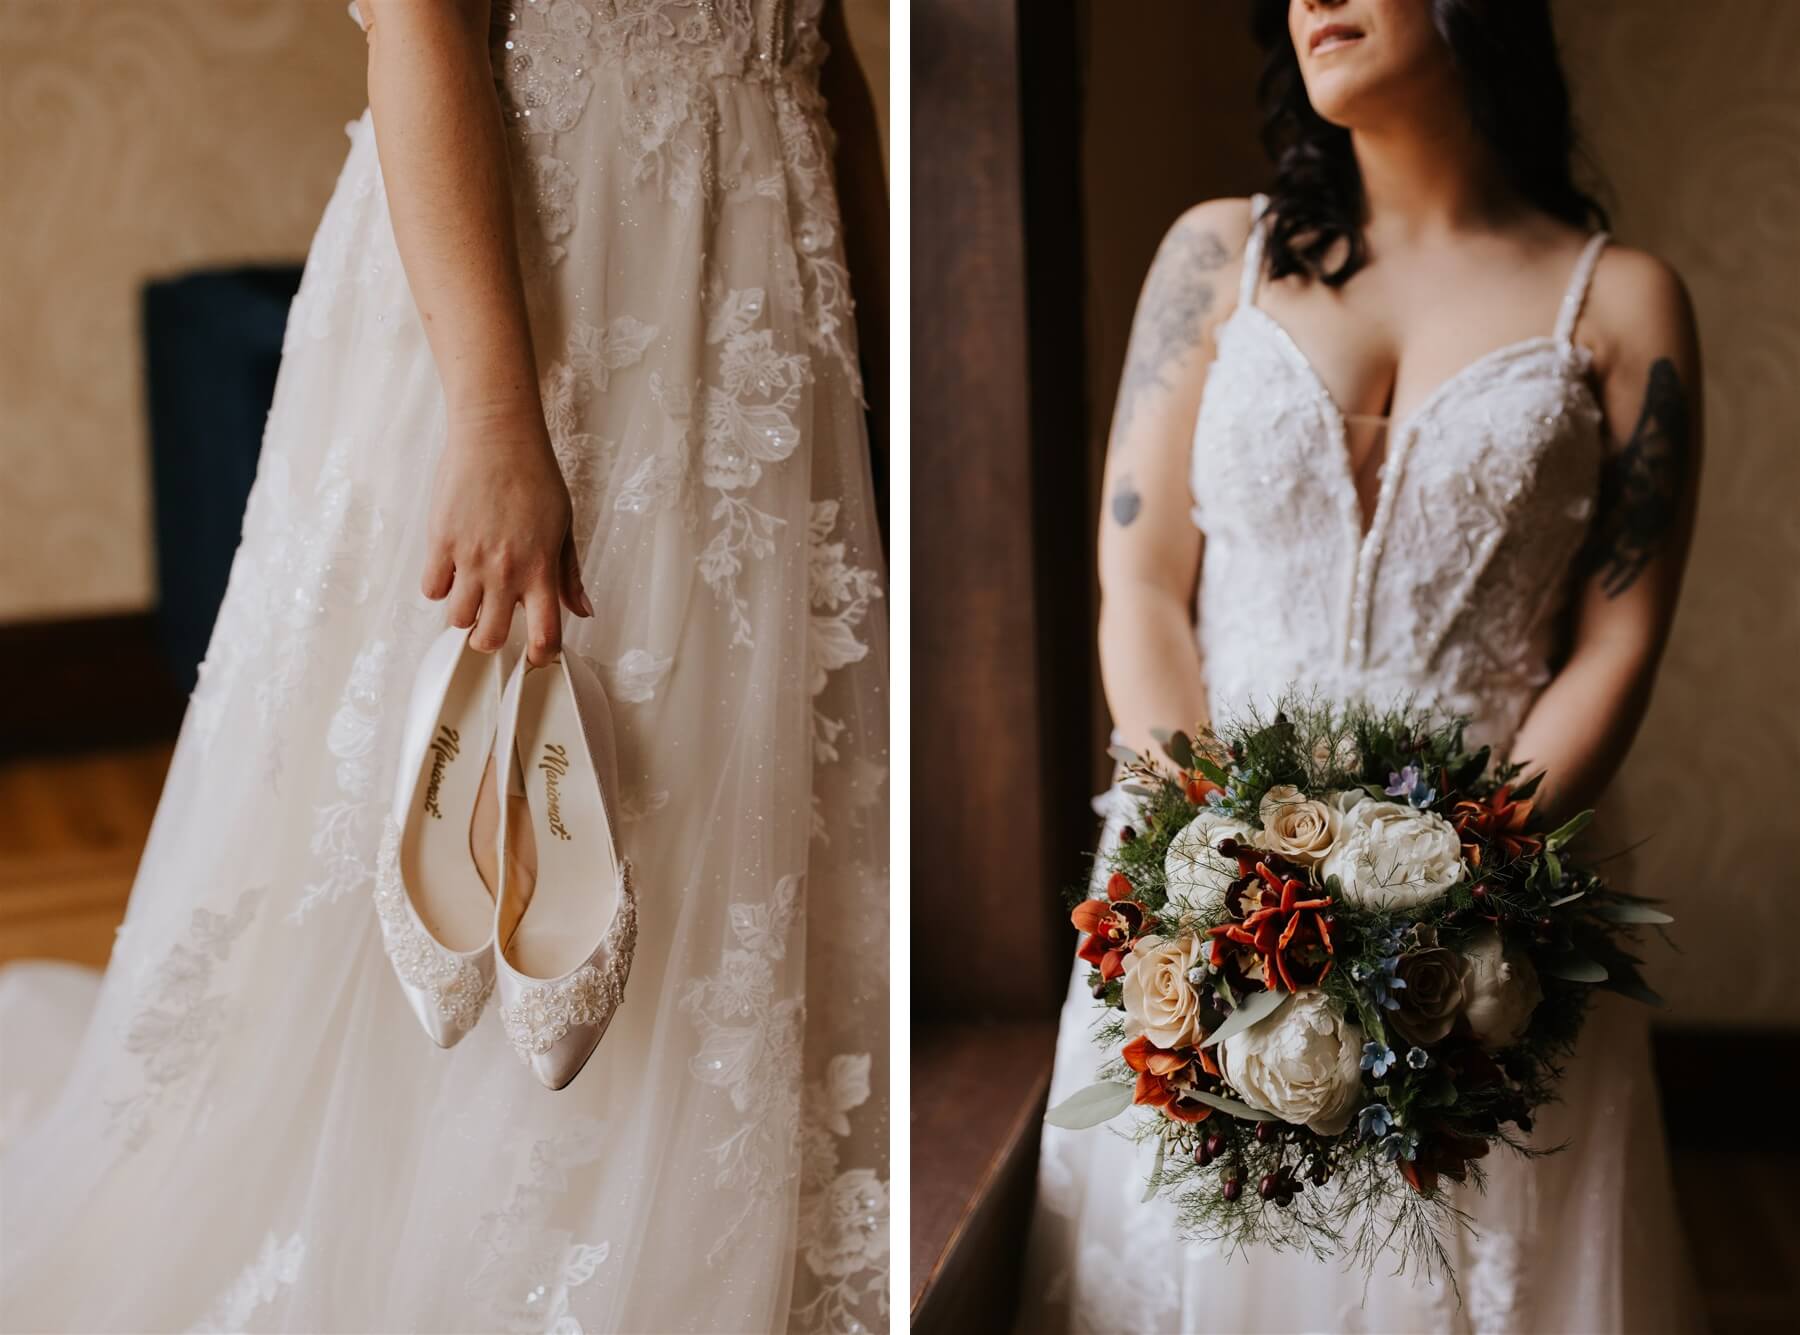 Bride holding white high heels in front of tulle dress | bride holding bouquet with red, cream, and orange flowers